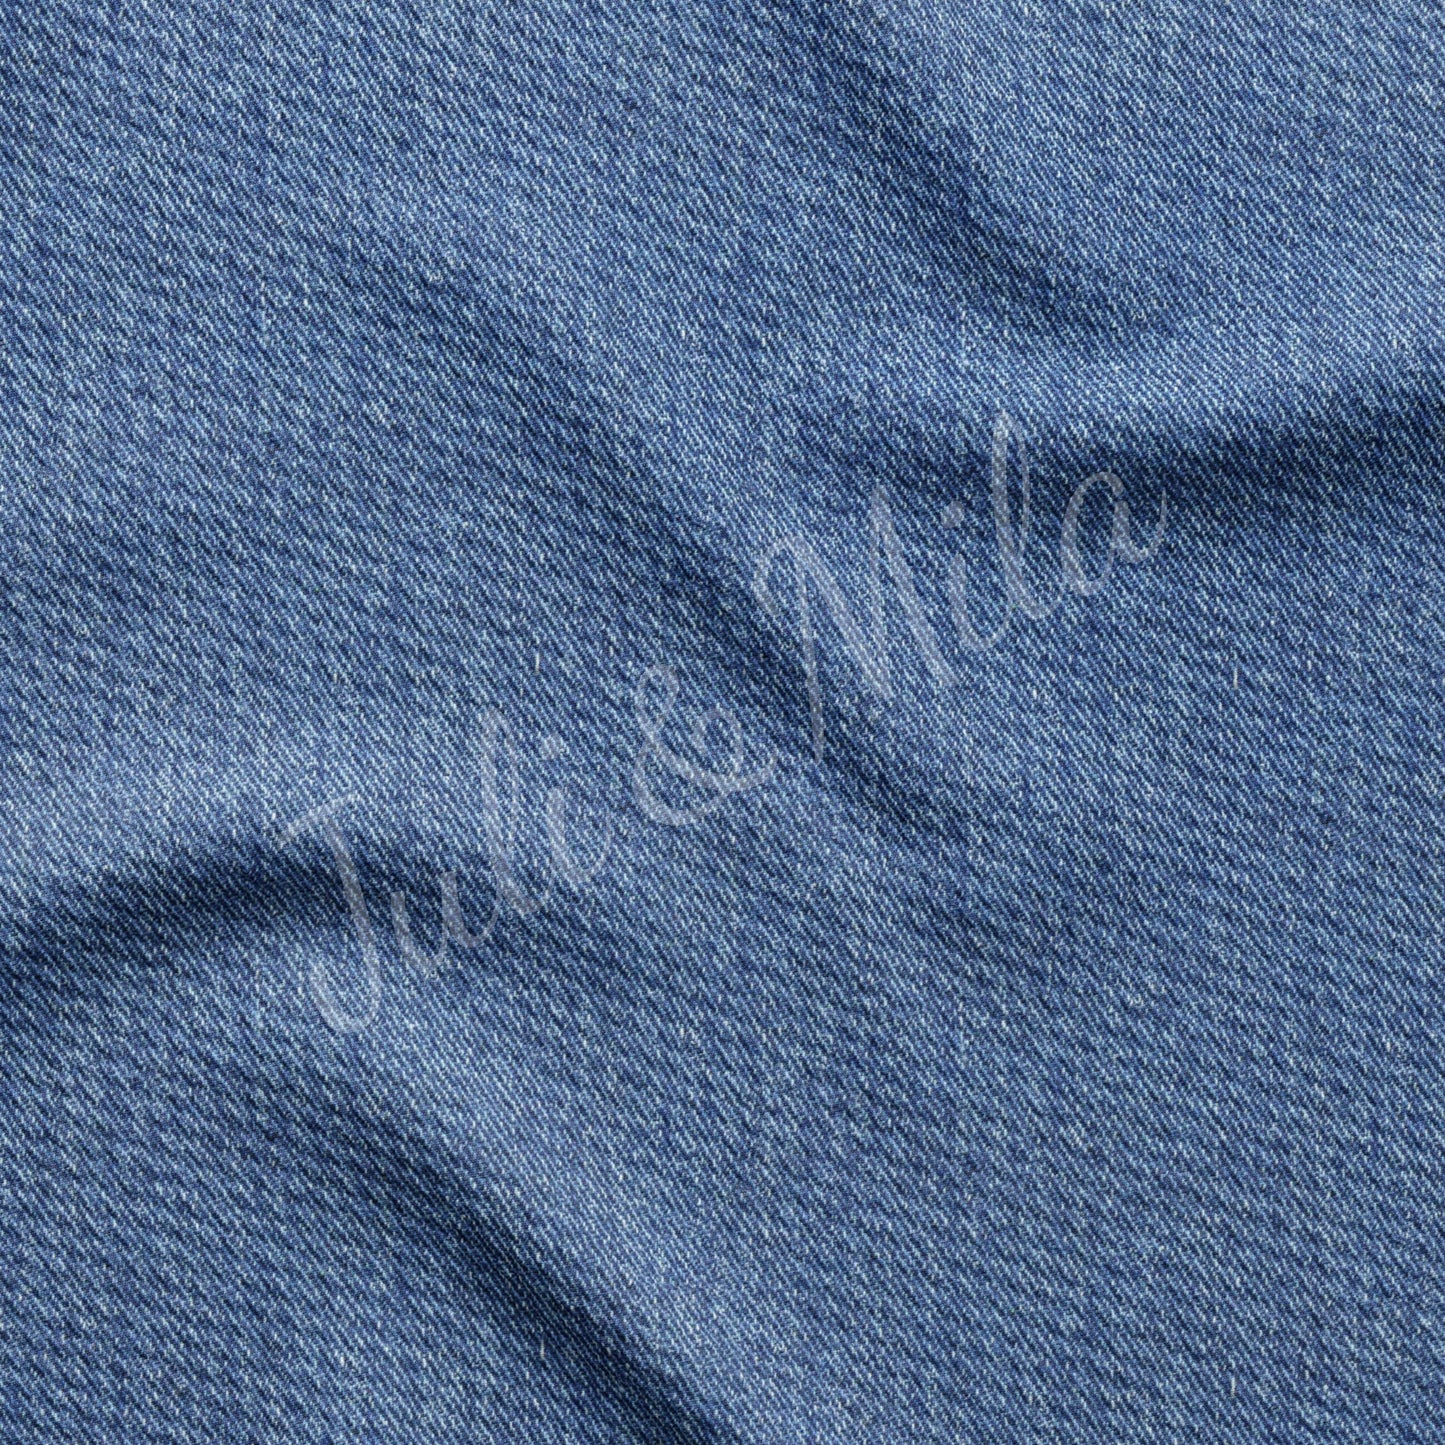 Jeans  Bullet Textured Fabric Fabric jeans